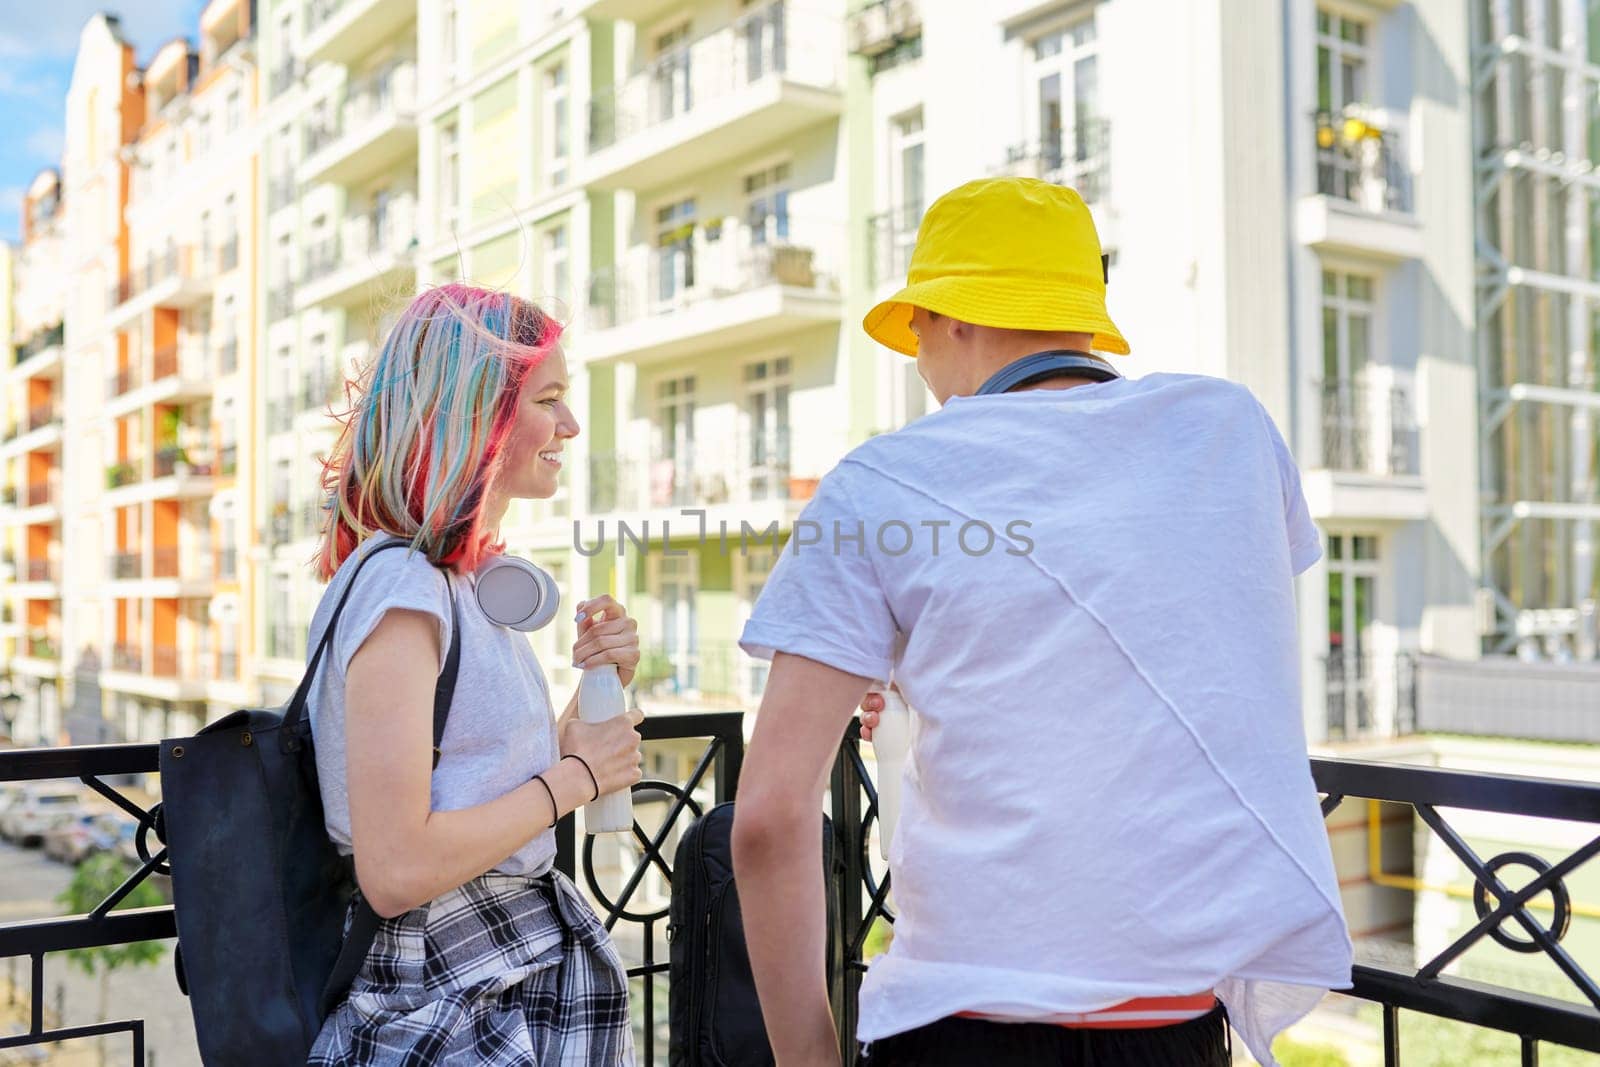 Urban lifestyle of teenagers, couple of college students talking having rest drinking milk drink in bottle outdoors, city street background. Healthy food, youth, recreation and communication concept